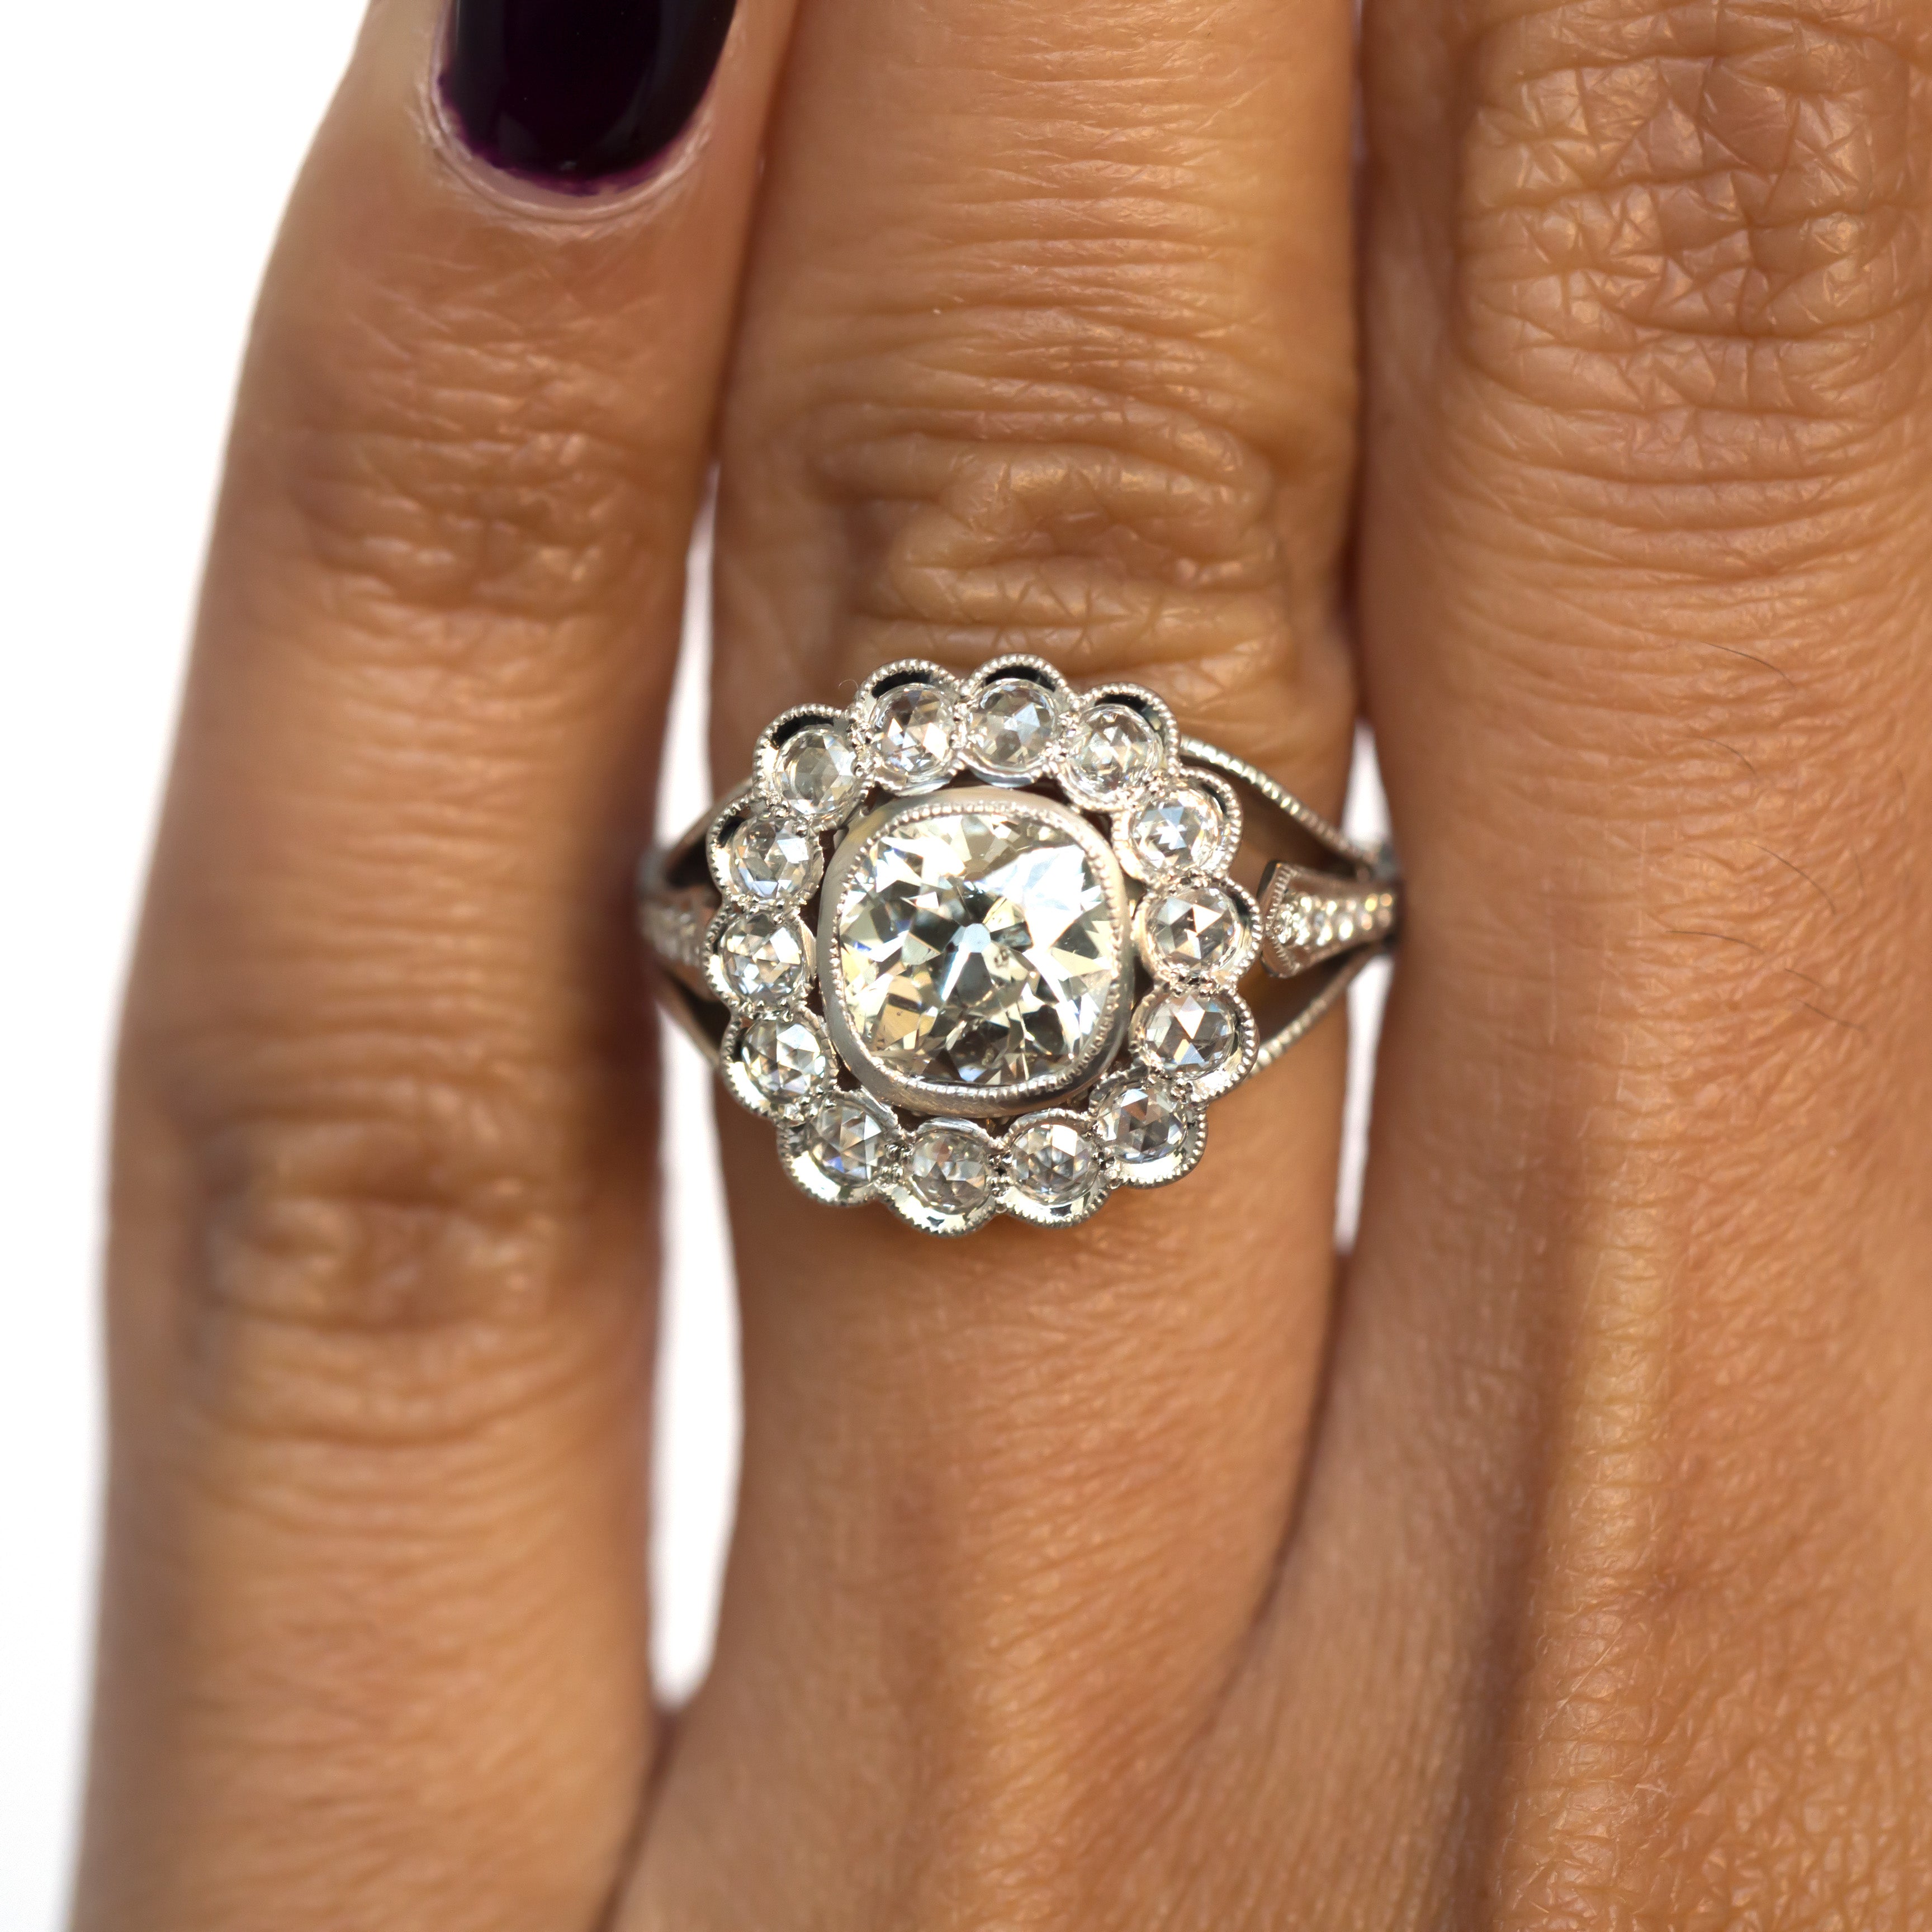 Affordable Engagement Rings | Sol's Jewelry & Loan - Omaha, NE